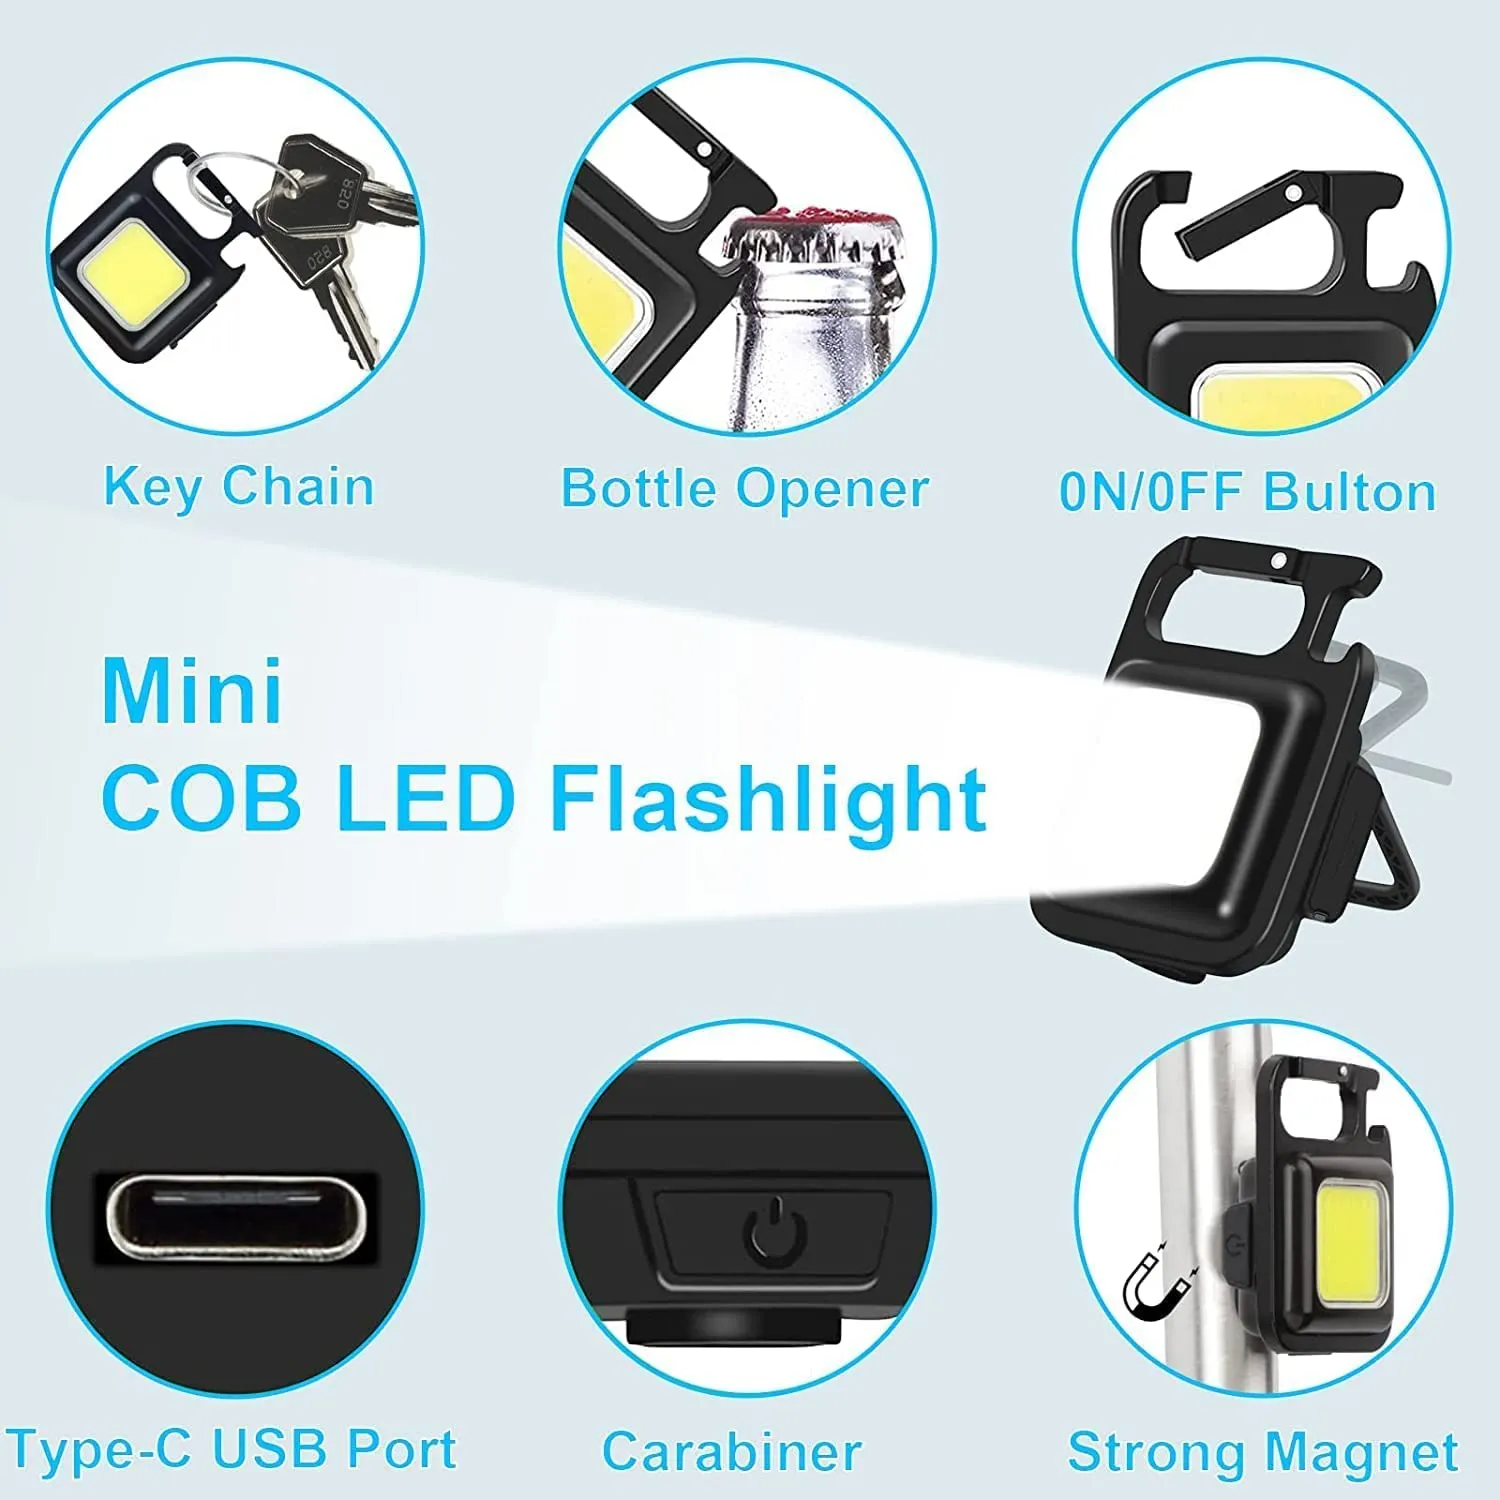 Buy Led Light Key Chain at best prices in Pakistan|Rhizmall.pk